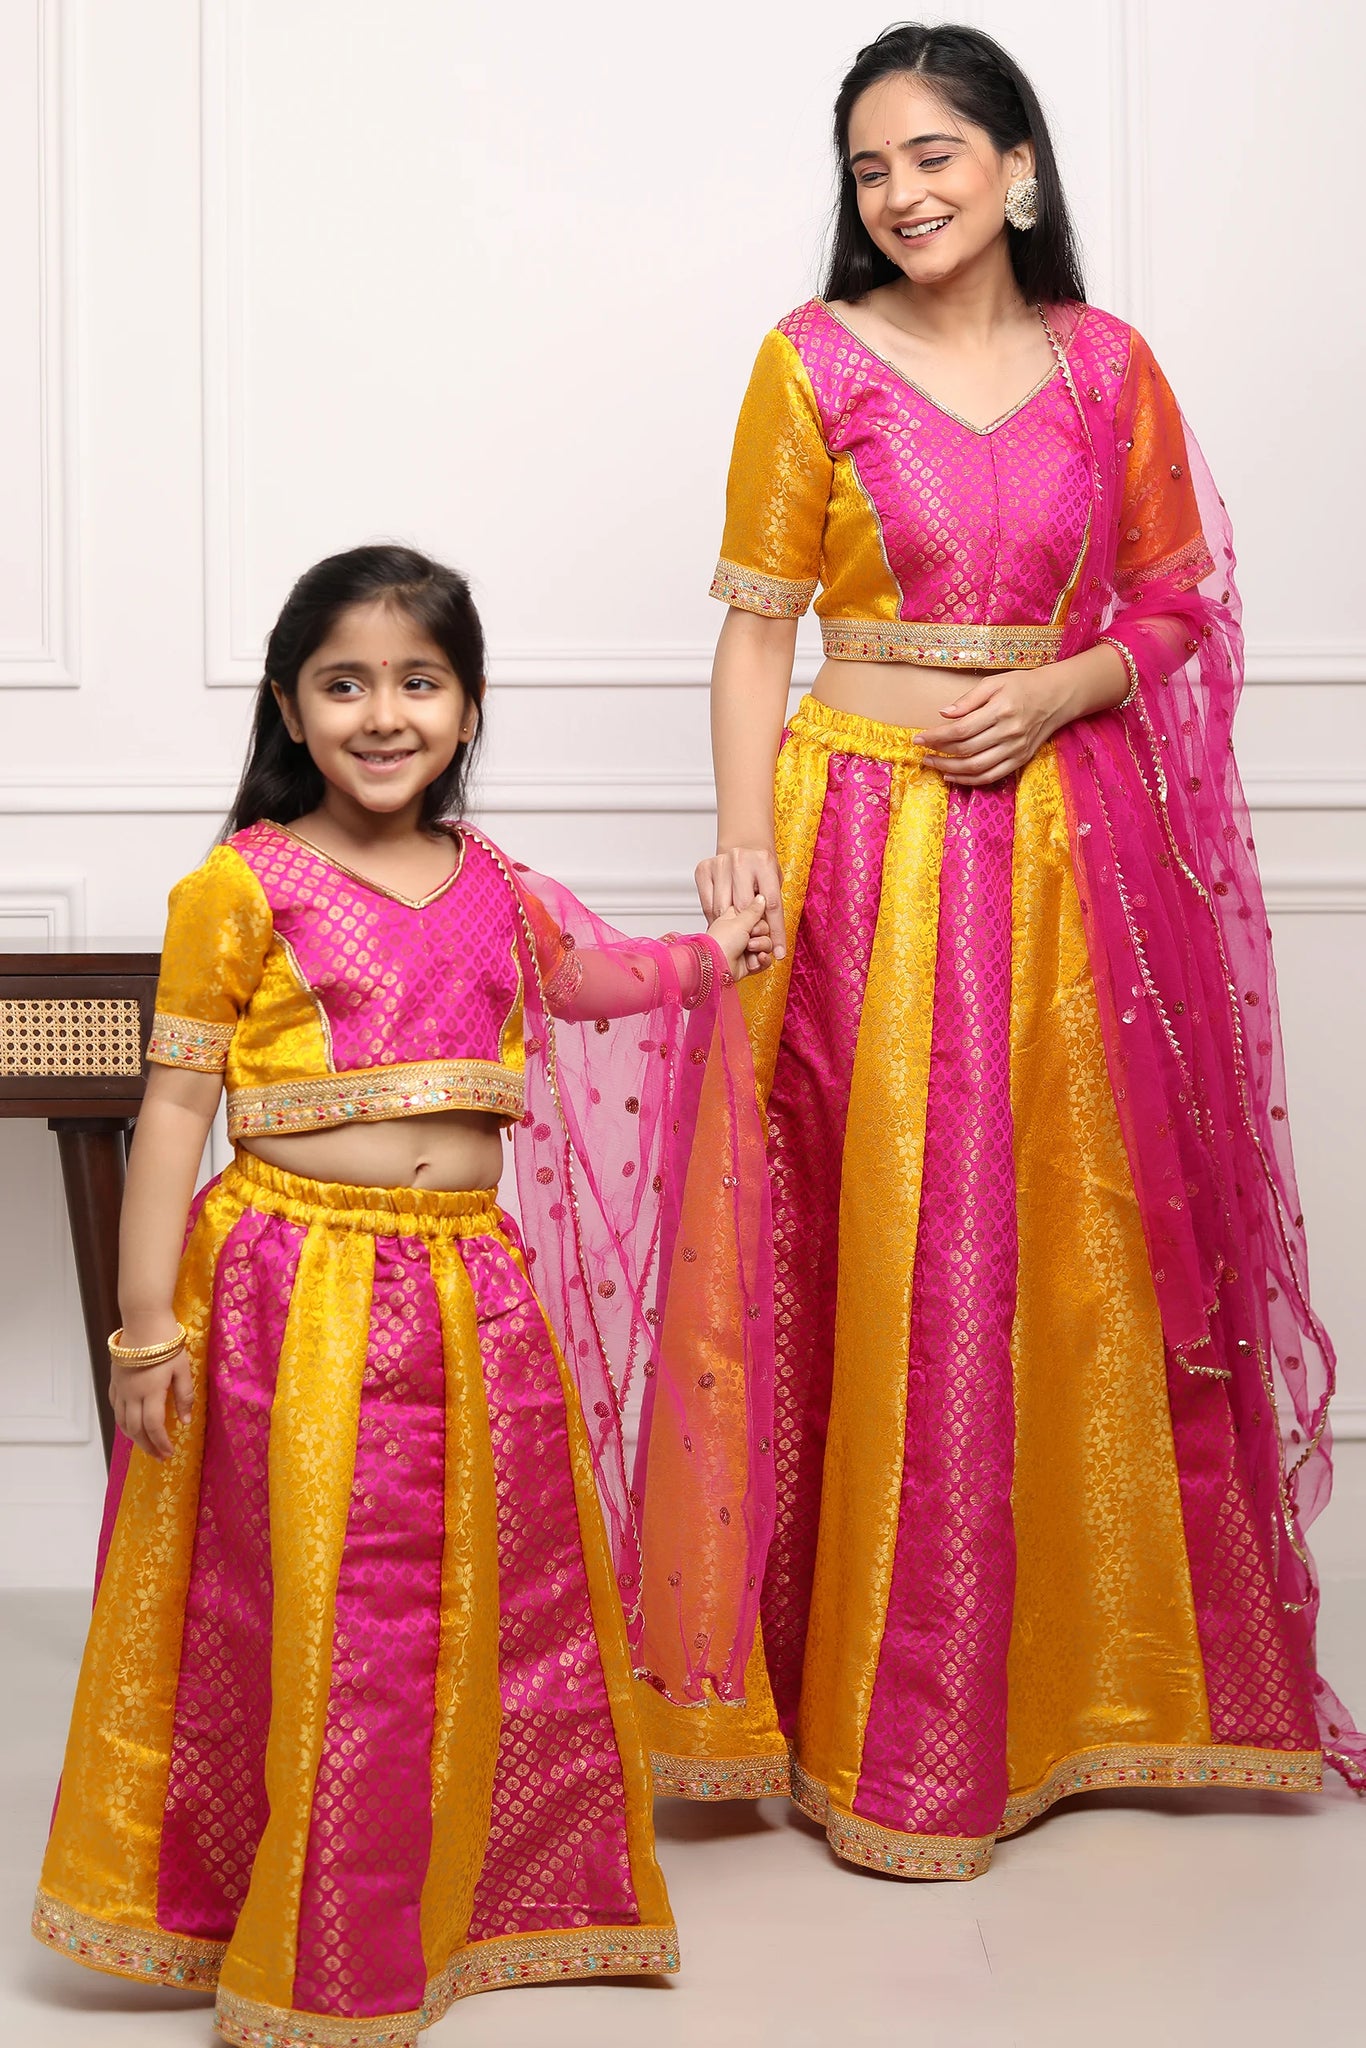 Mother Daughter Wear Pink Color Lehenga Choli with Jacket | TheIndianFab